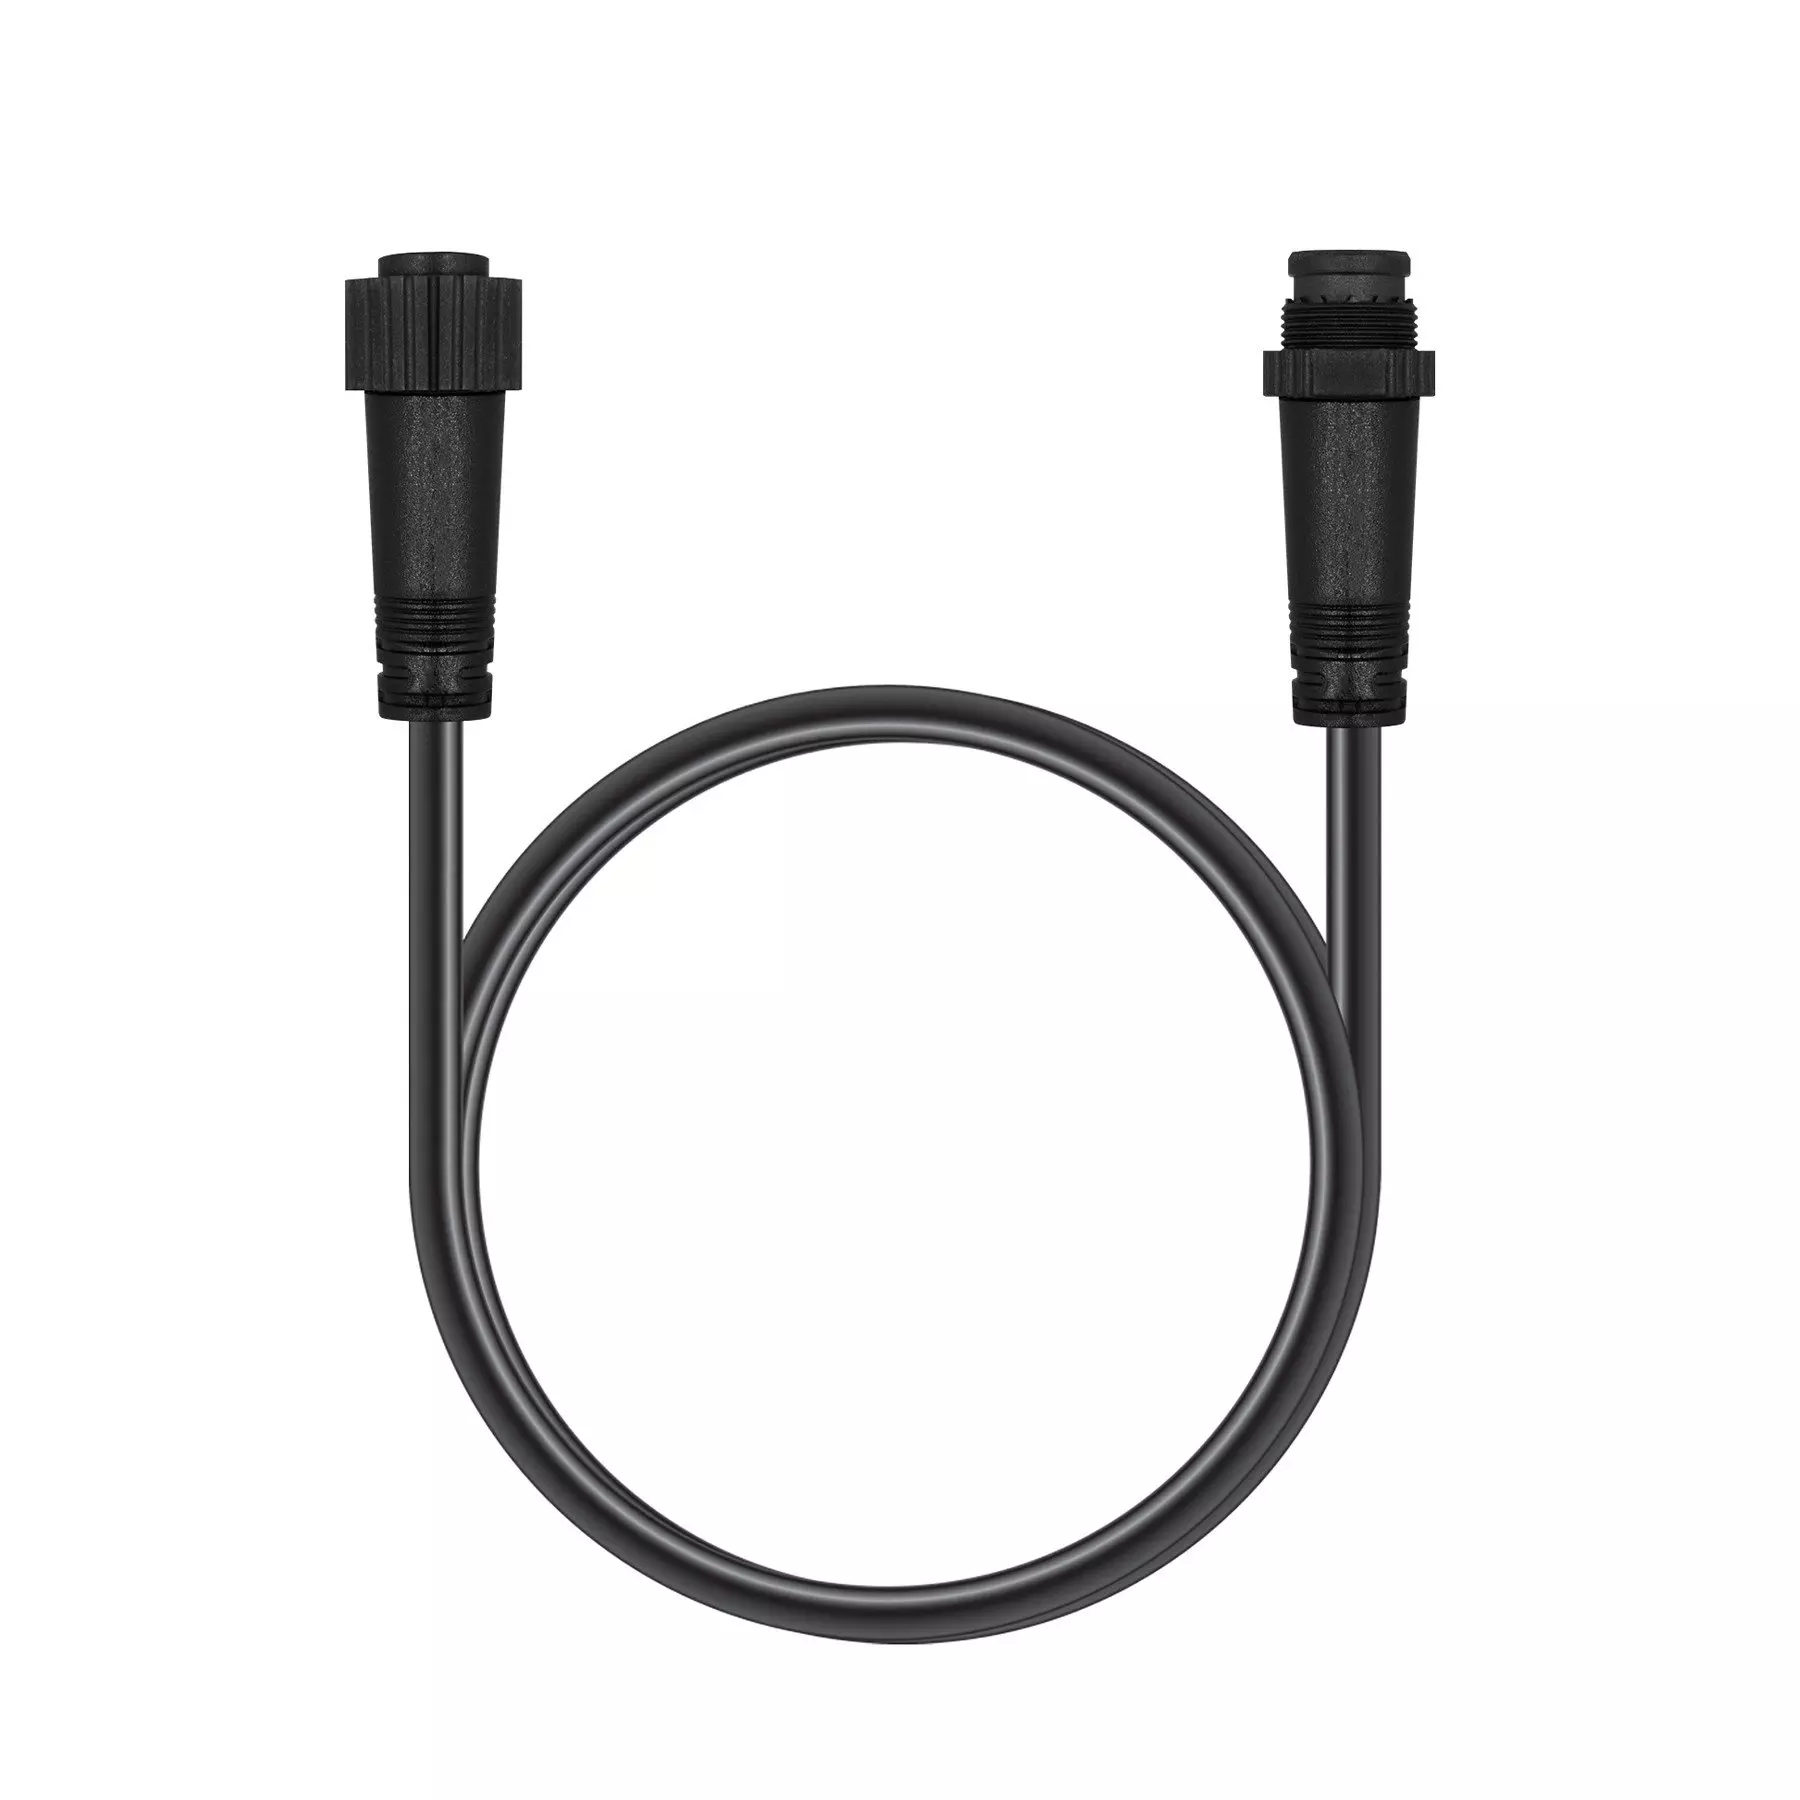 Hombli Outdoor Pathway Light Extension Cable